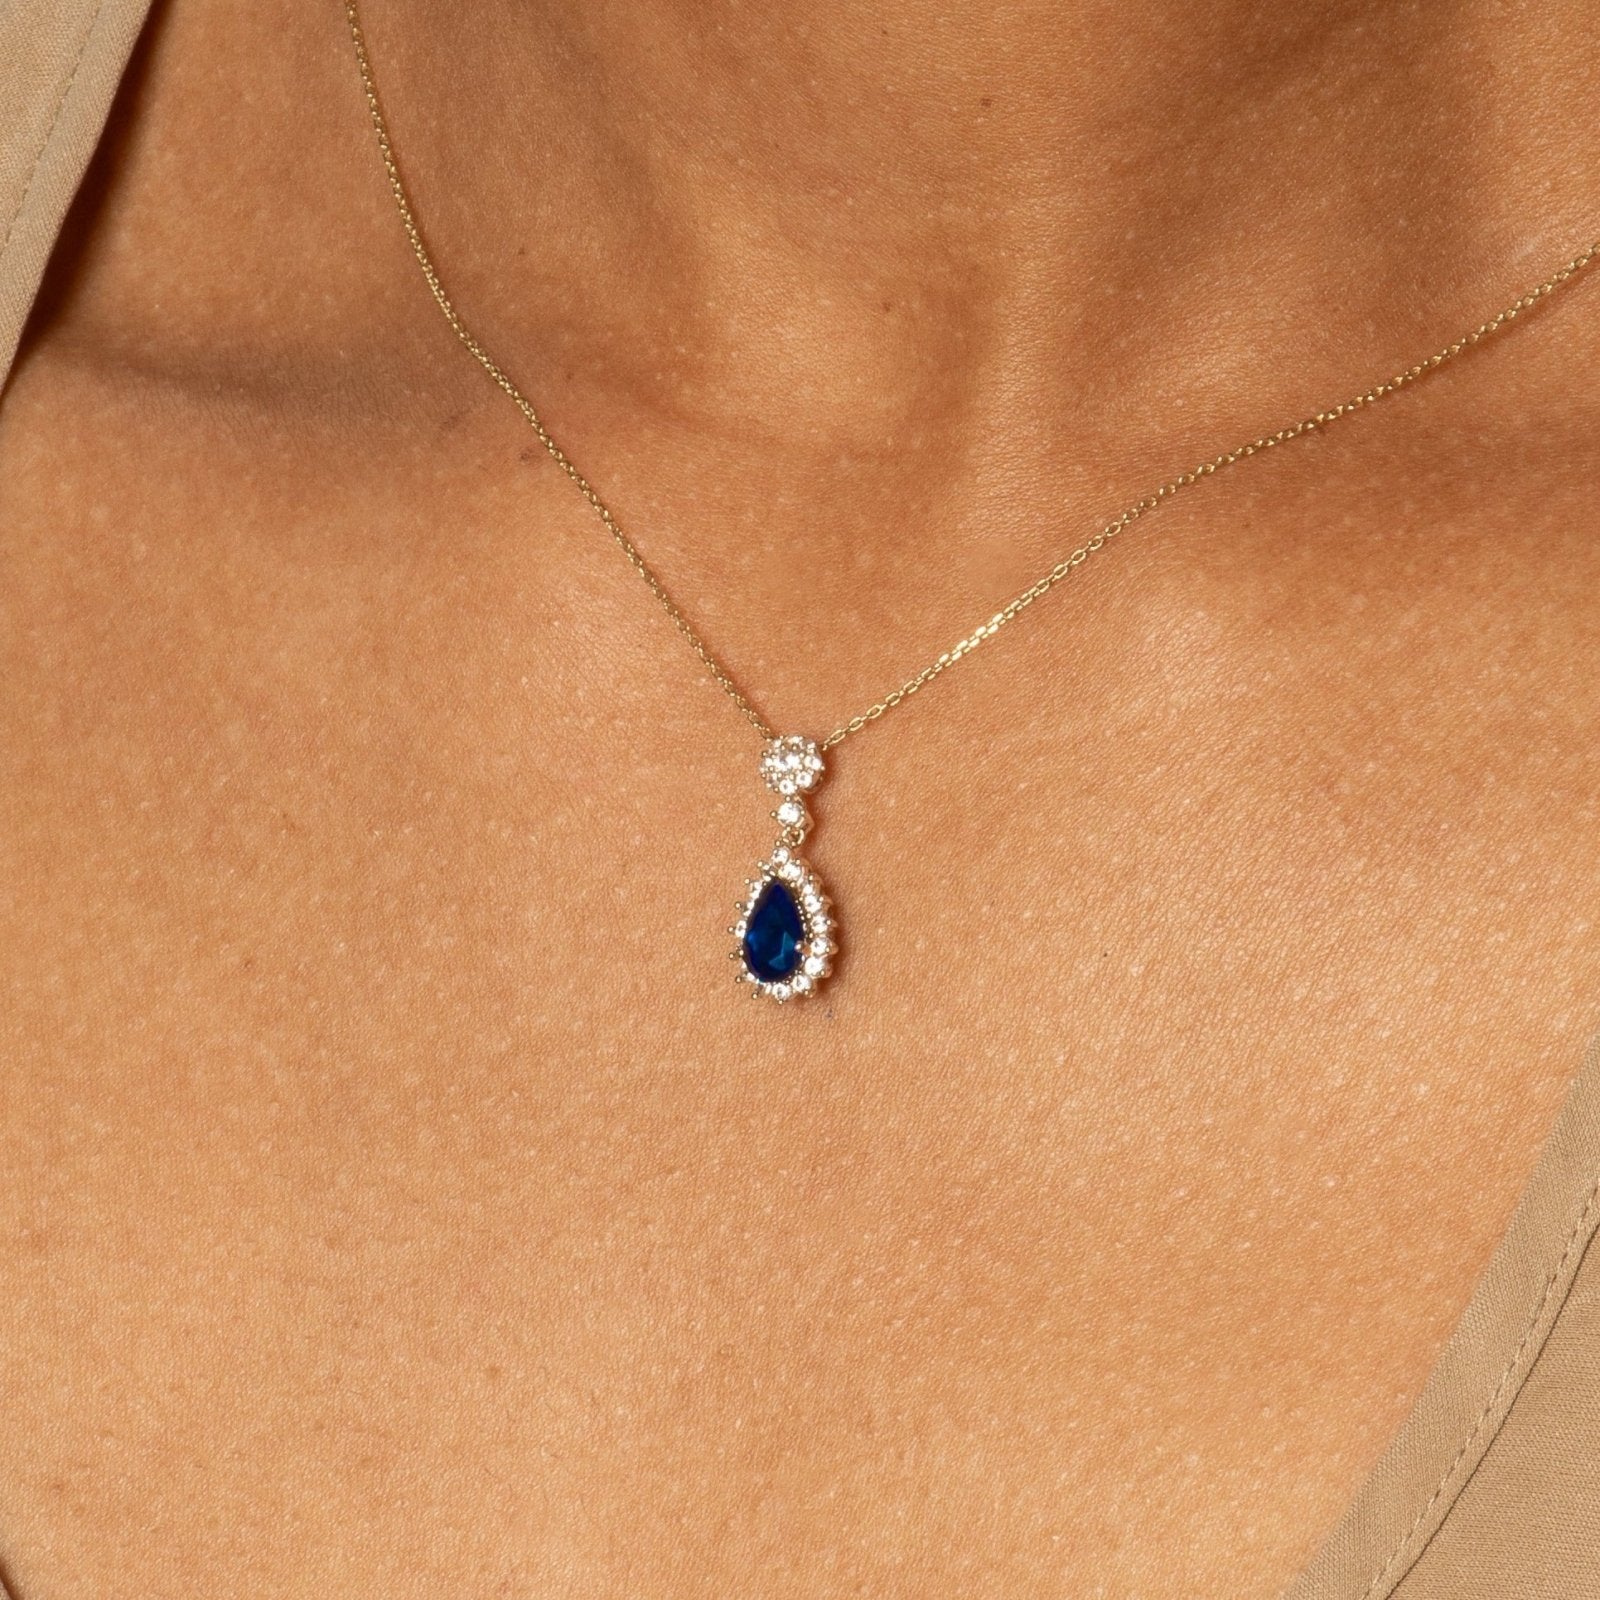 Teardrop Shaped Sapphire with White Sapphire Halo Necklaces Estella Collection 32721 10k 925 Birthstone #tag4# #tag5# #tag6# #tag7# #tag8# #tag9# #tag10#